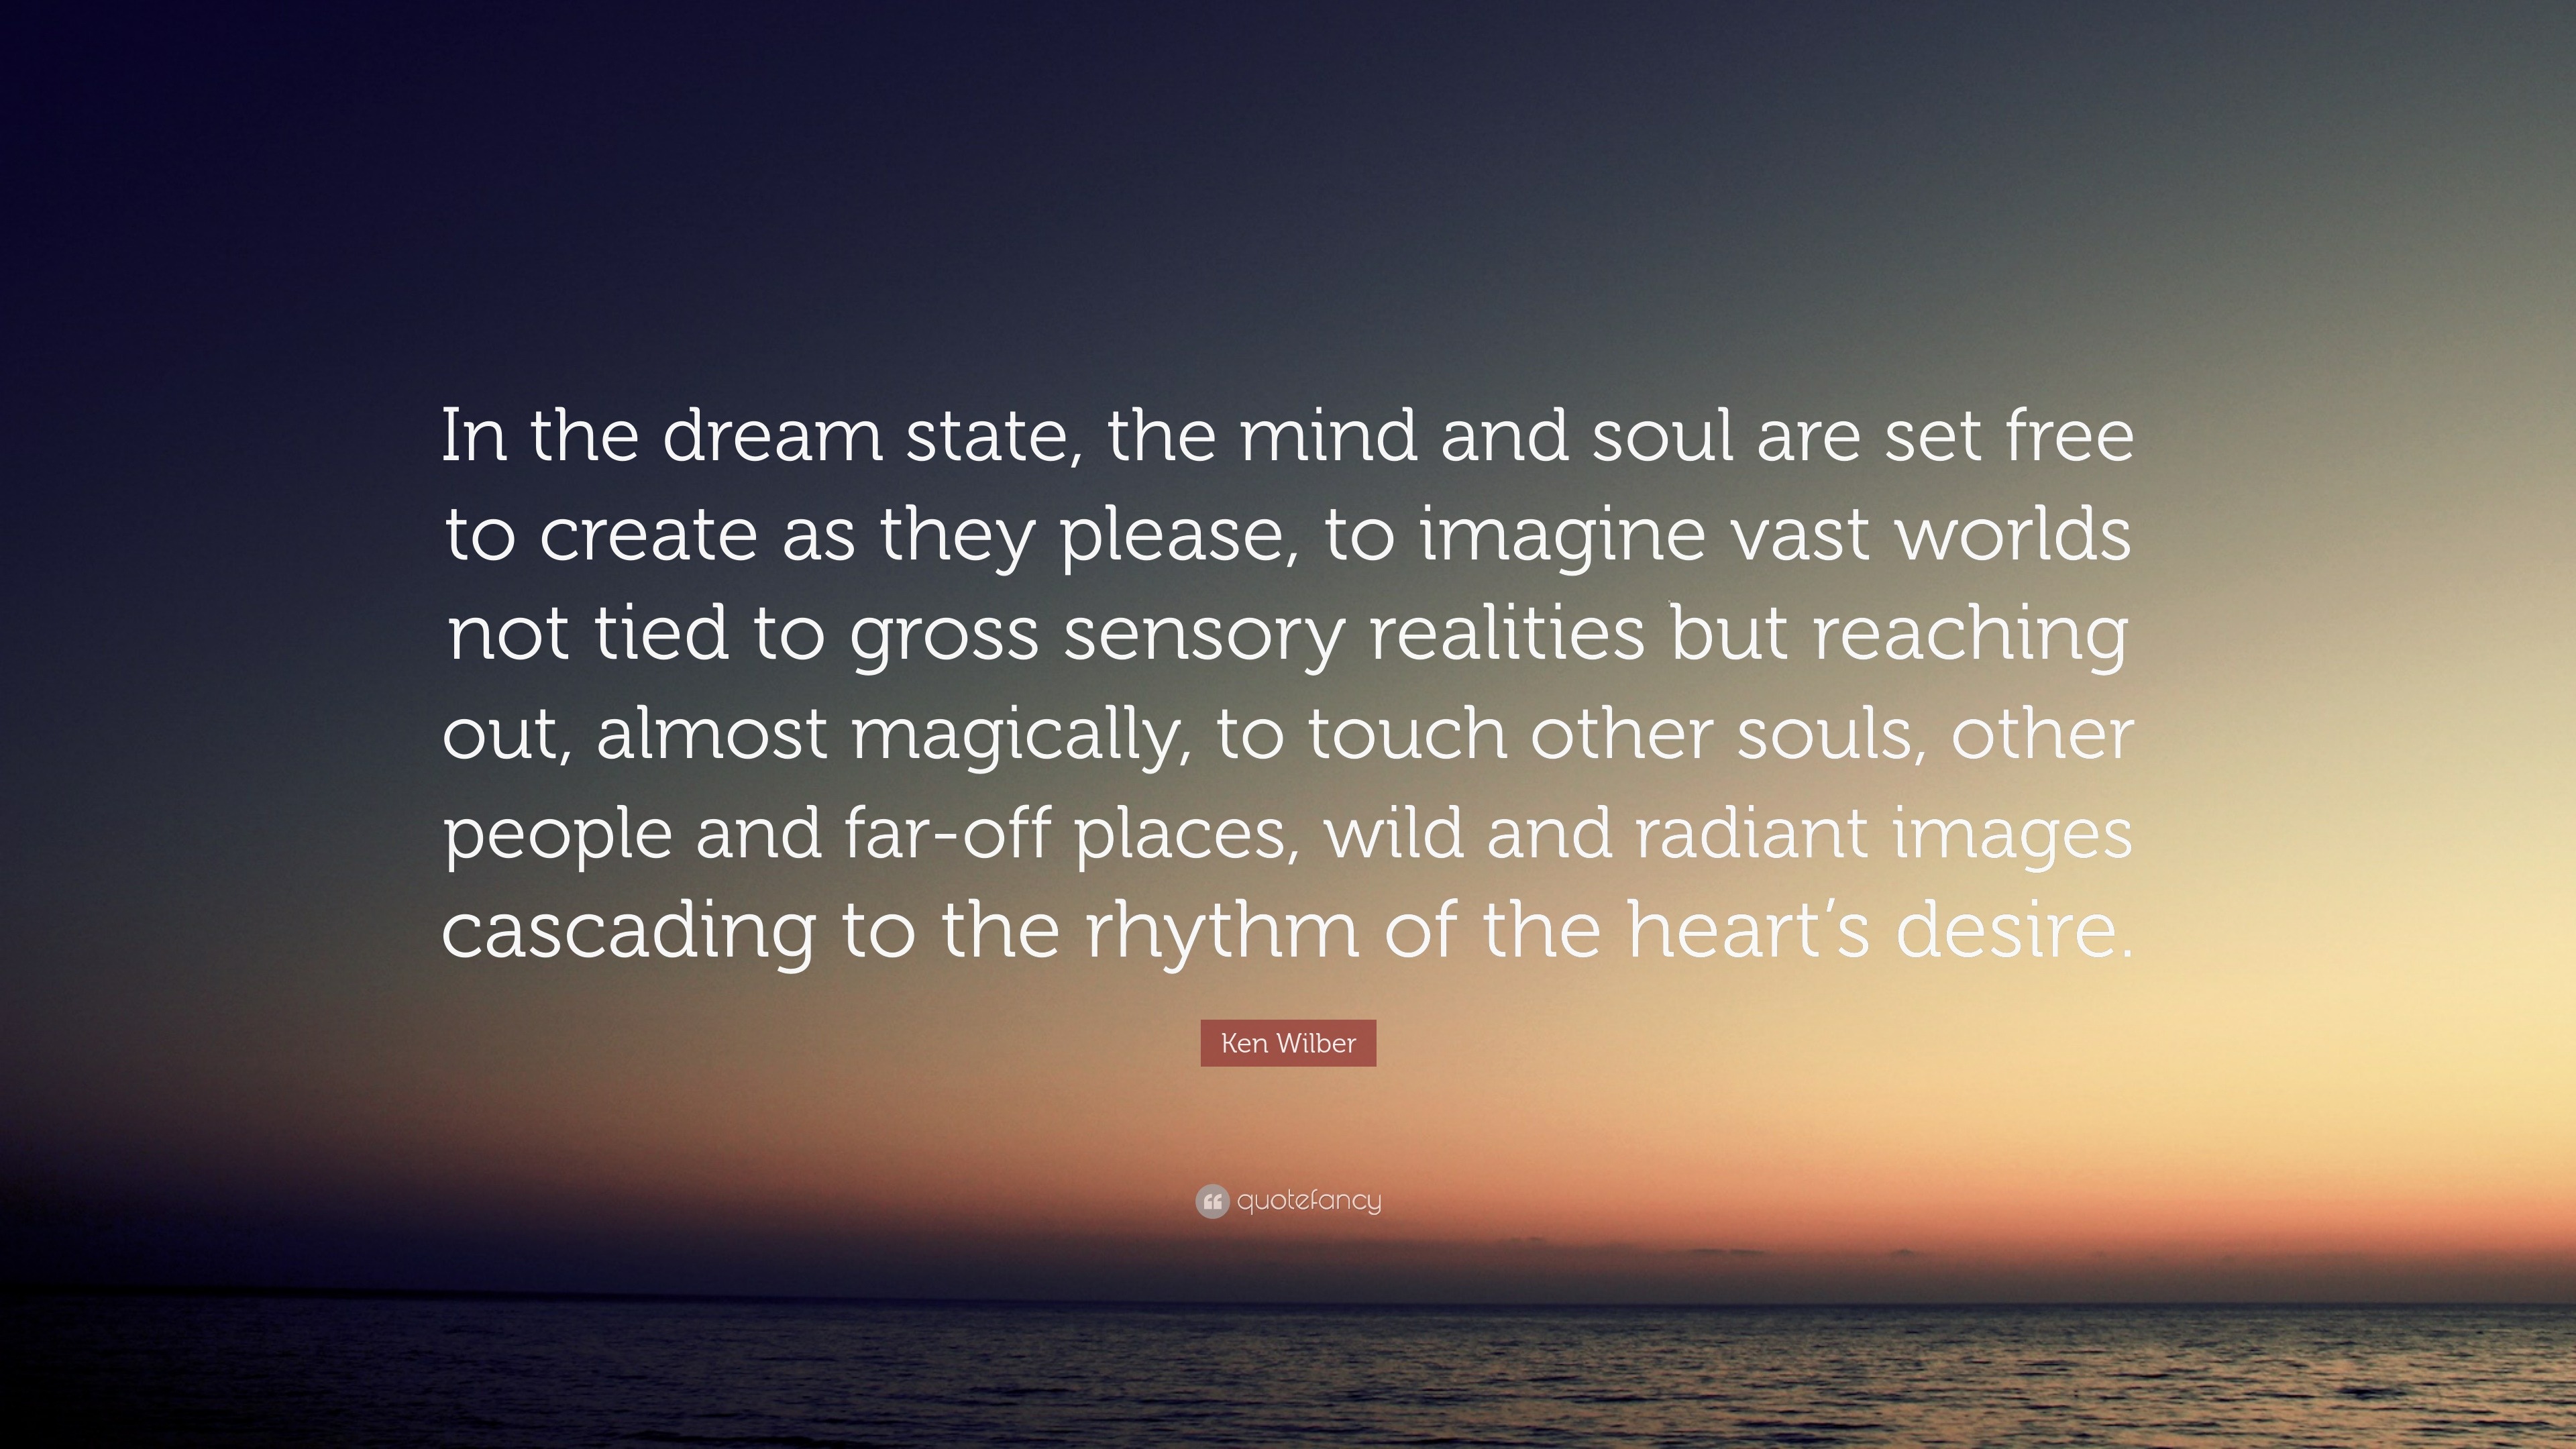 Ken Wilber Quote: “In the dream state, the mind and soul are set